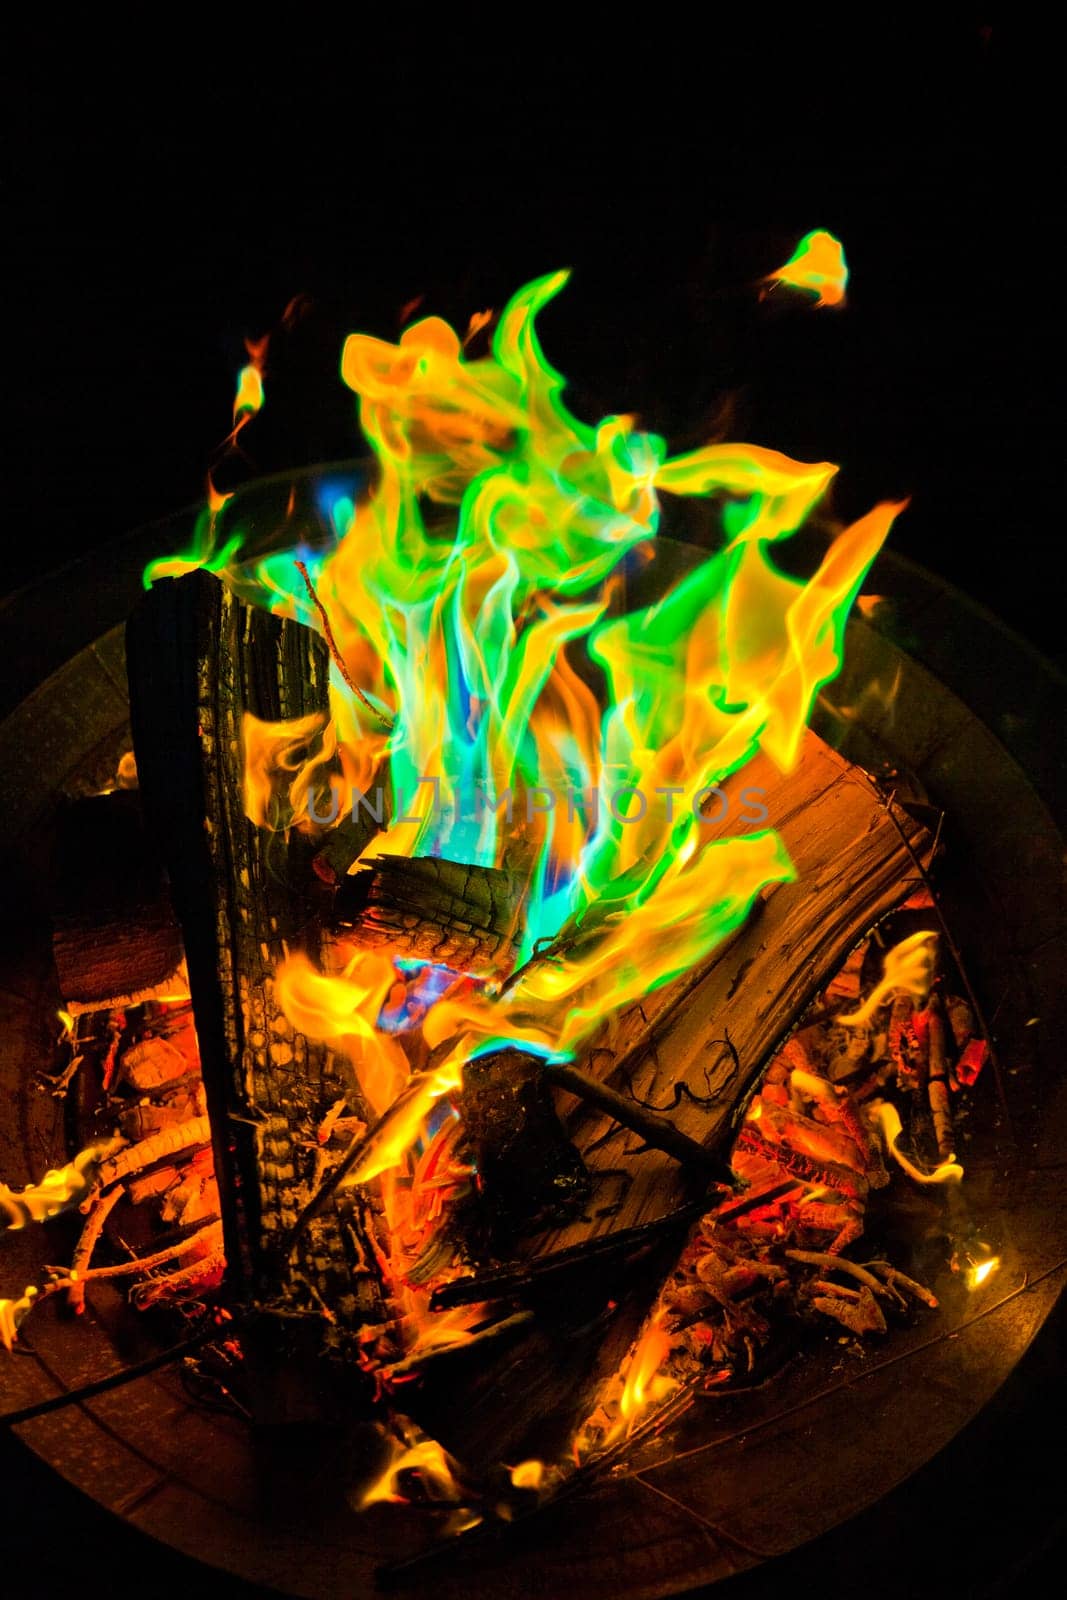 Experience the mesmerizing dance of vibrant, mystique-colored flames in a metal fire pit, illuminating the night in Fort Wayne, Indiana.